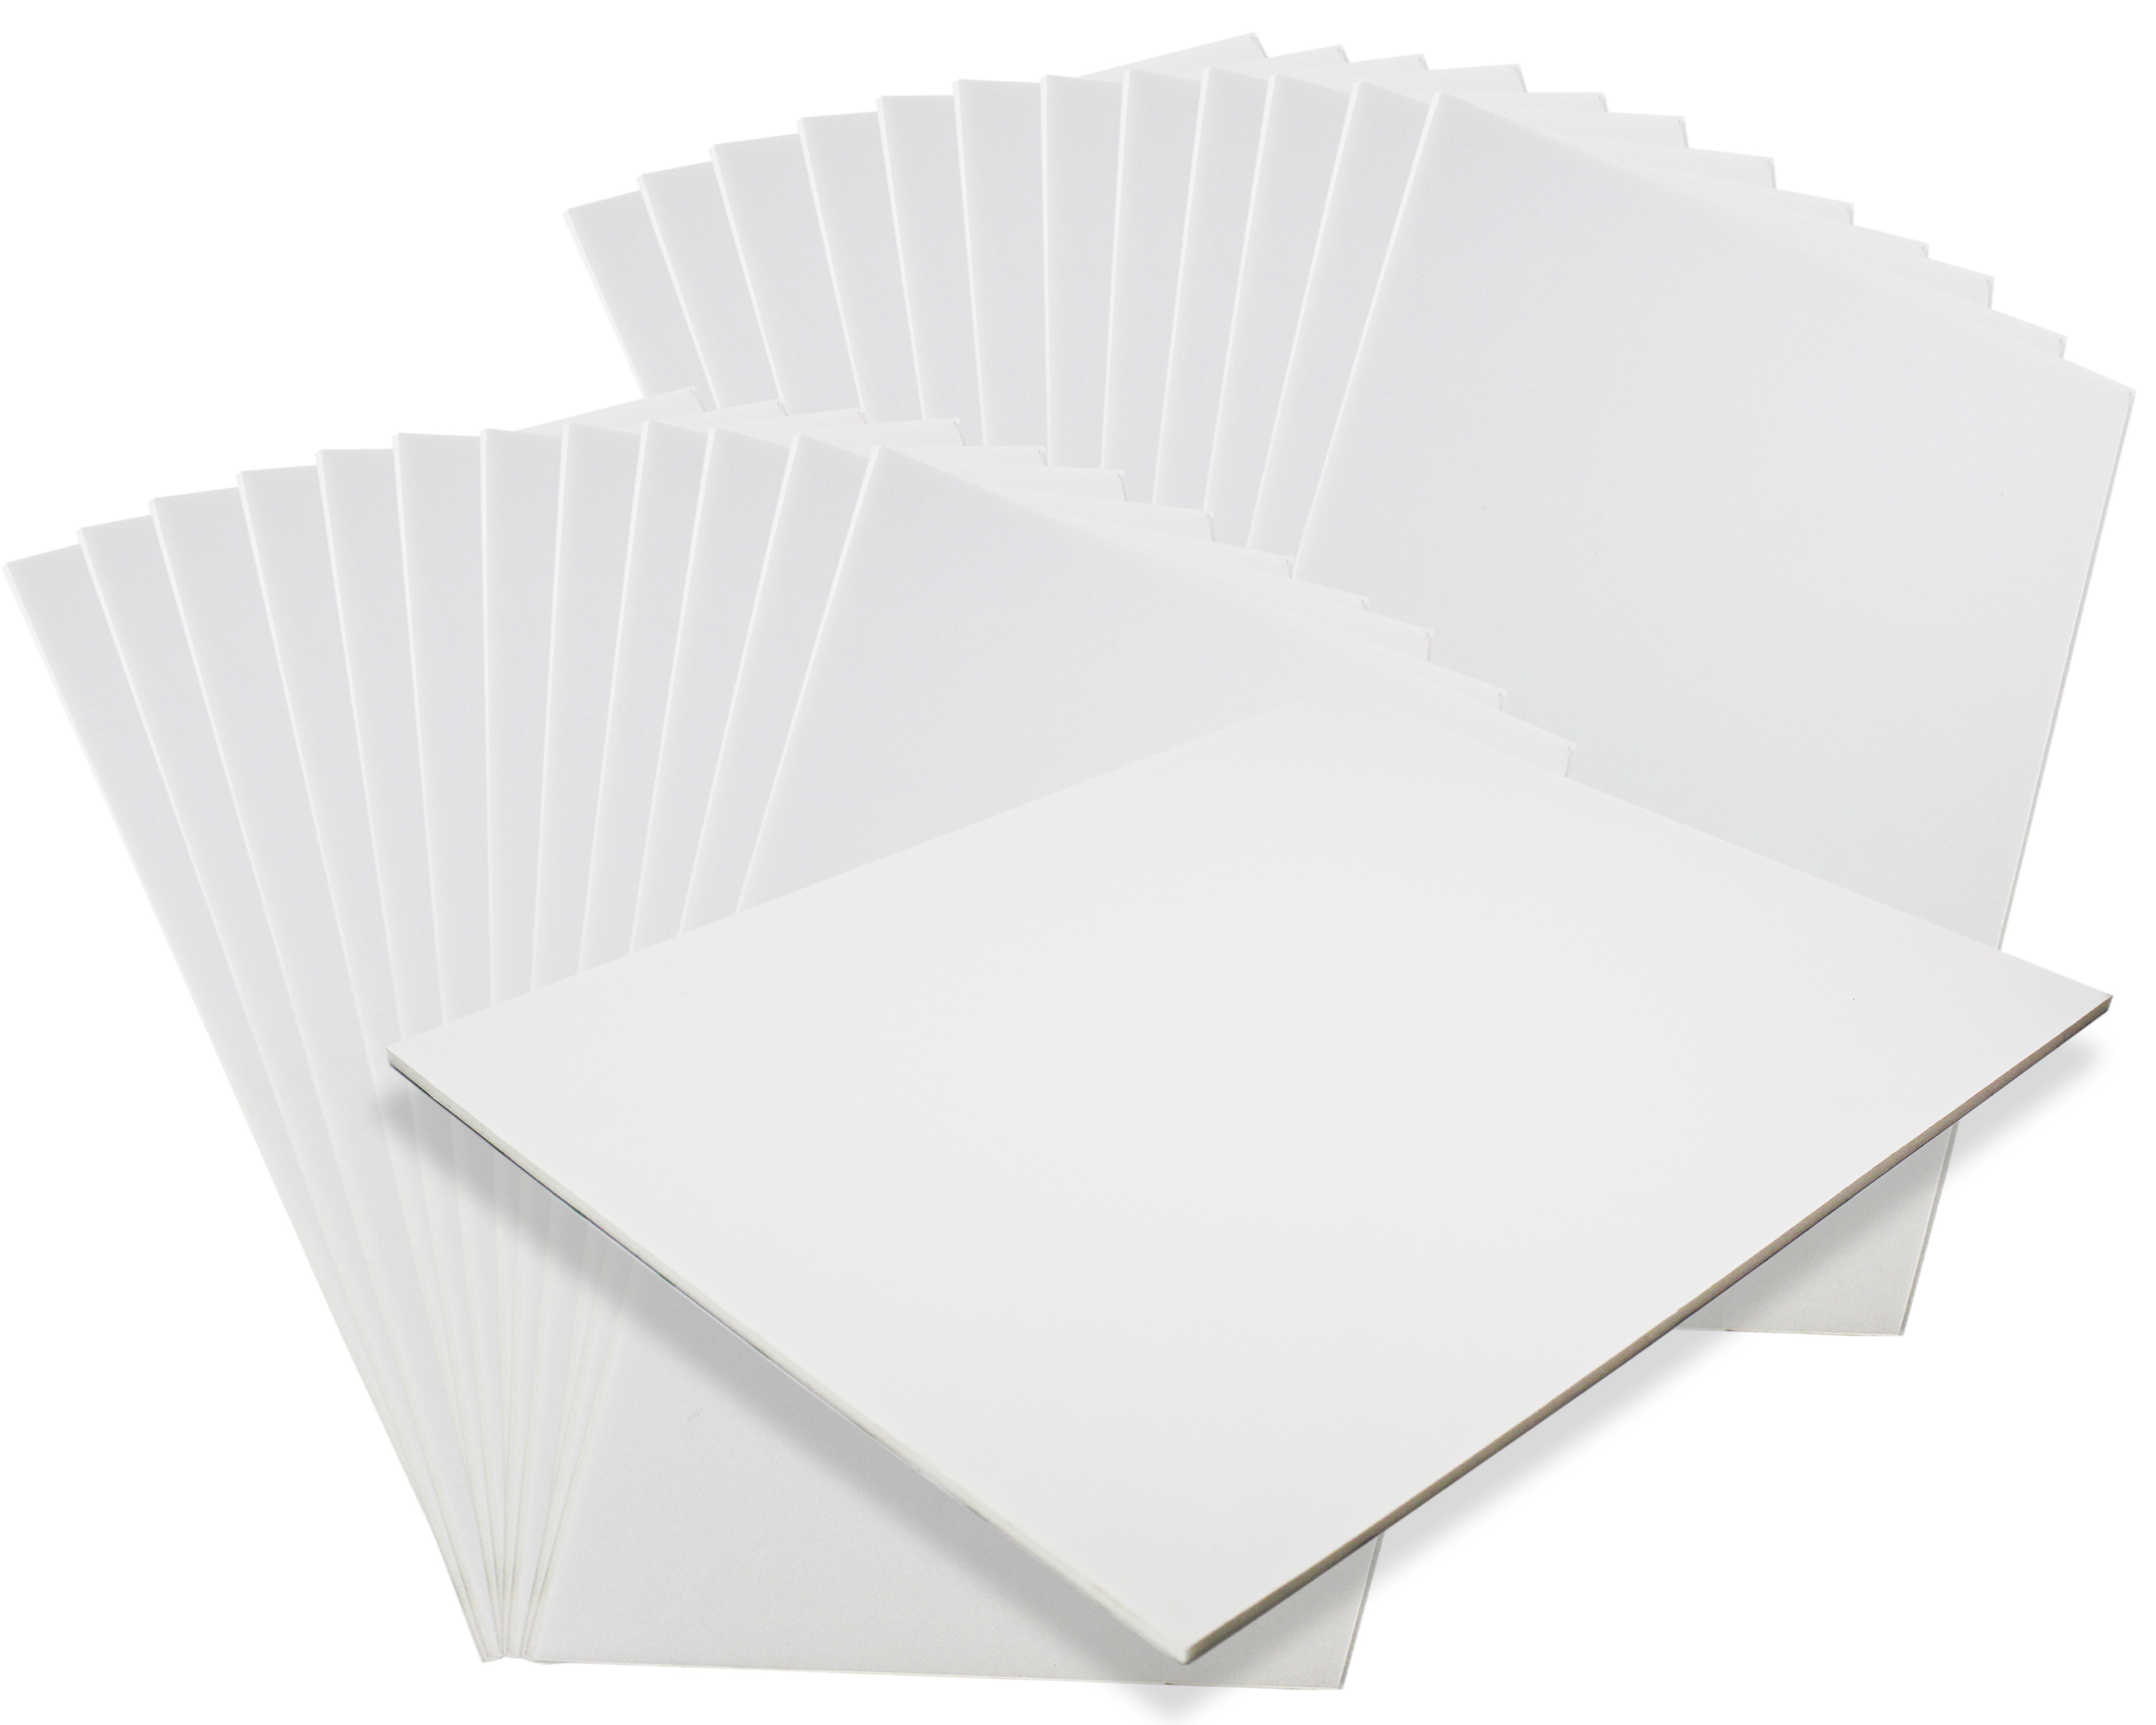 Foam Core Backing Board 3/16 White 11x17- 50 Pack. Many Sizes Available.  Acid Free Buffered Craft Poster Board for Signs, Presentations, School,  Office and Art Projects 